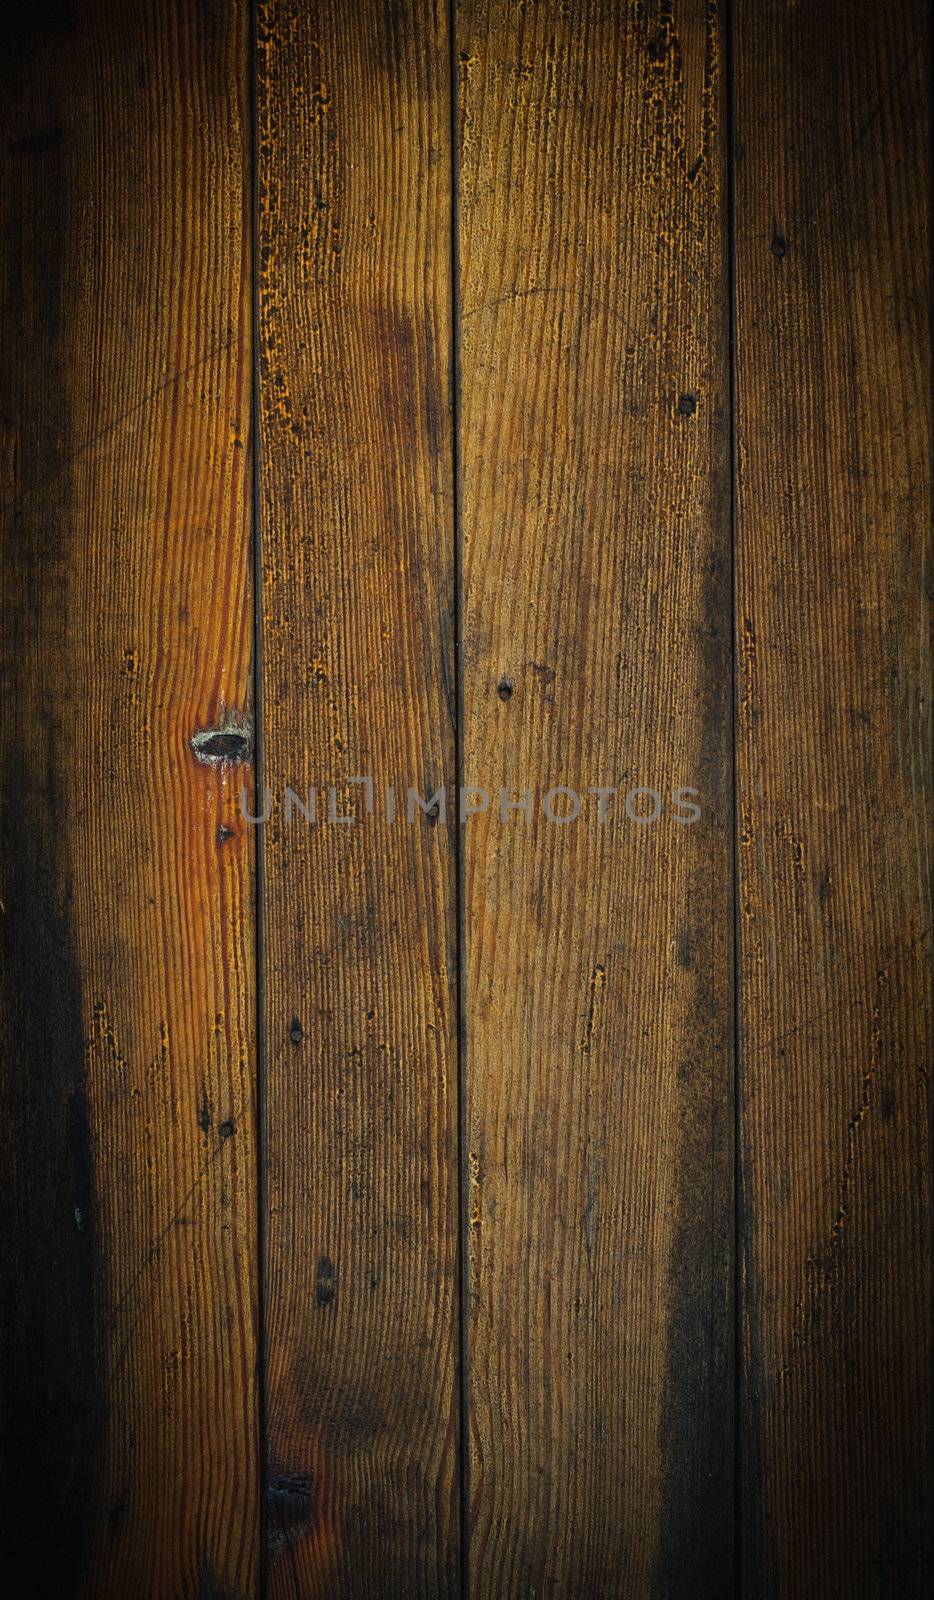 Wooden Board Texture by nvelichko